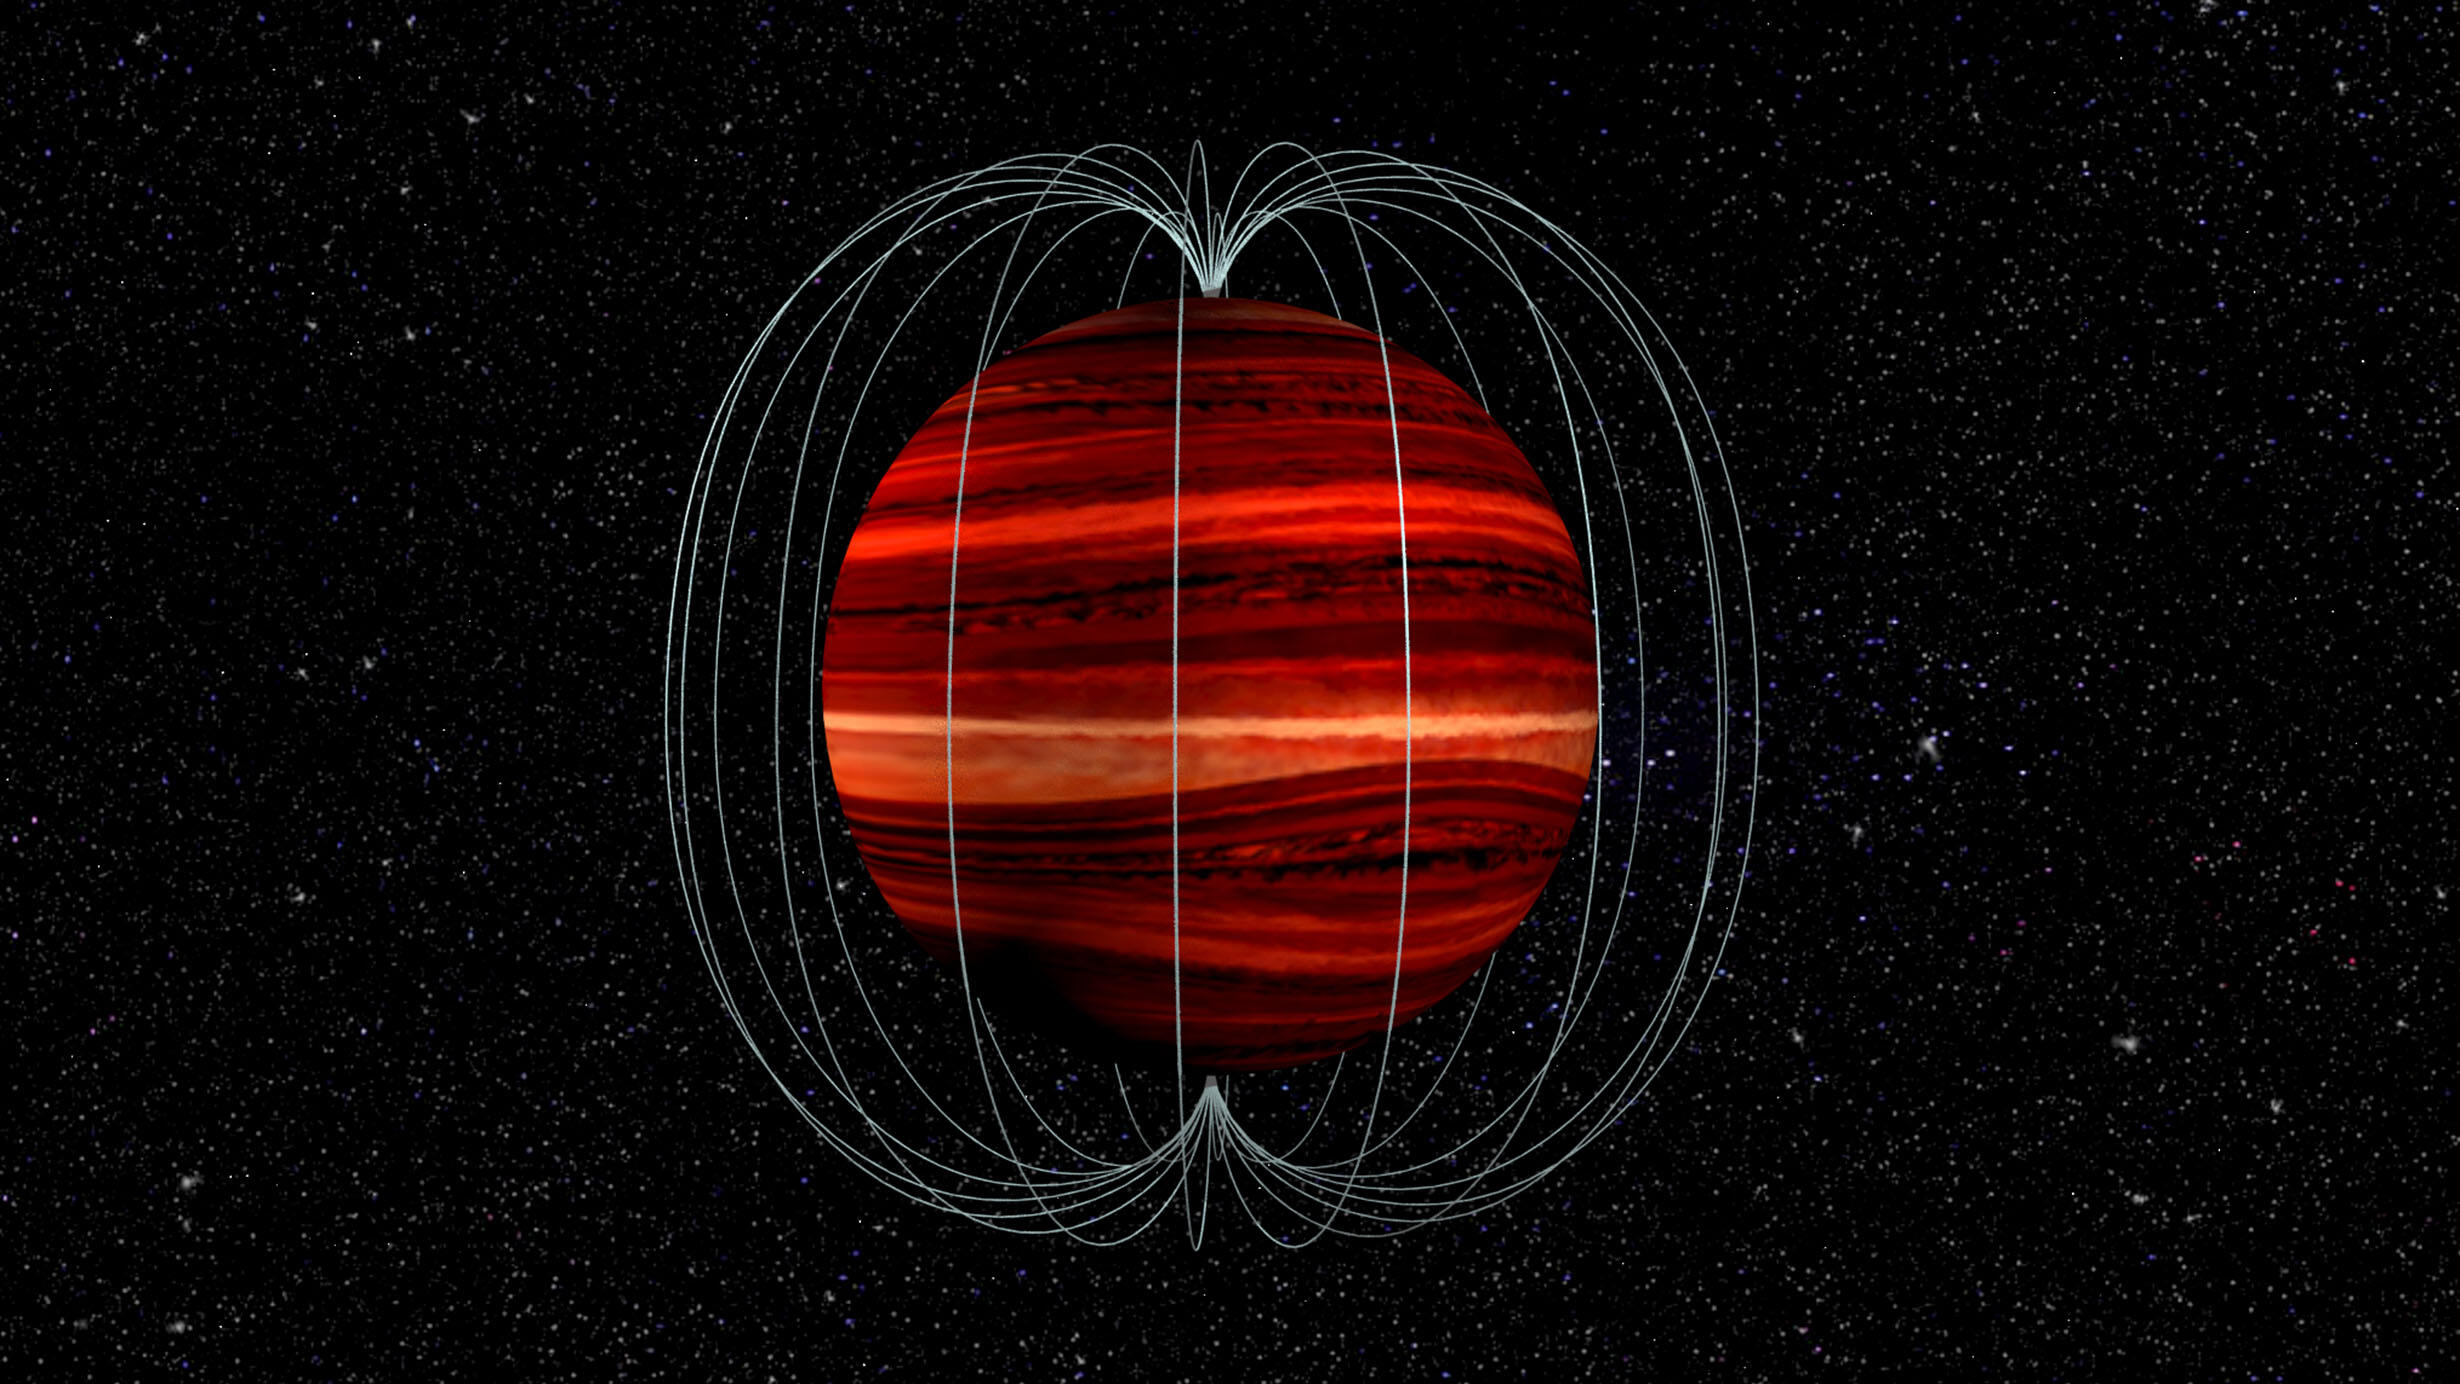 Artist's conception of a brown dwarf surrounded by its magnetic field.